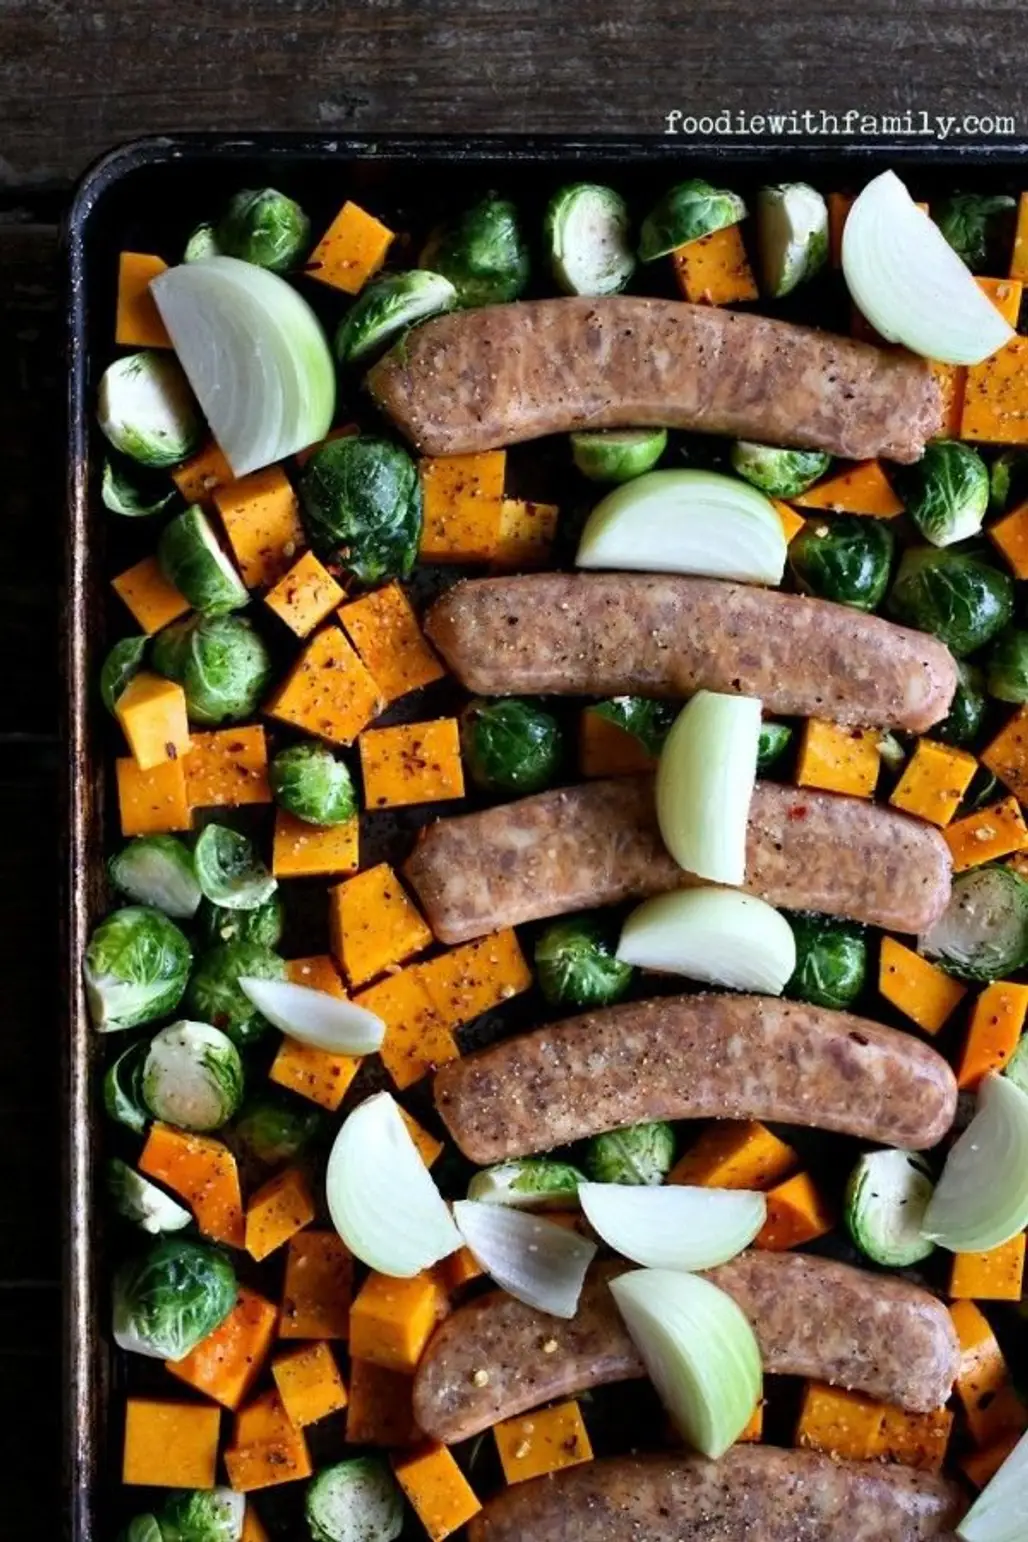 Roasted Brussels Sprouts, Butternut Squash, and Sweet Italian Sausage